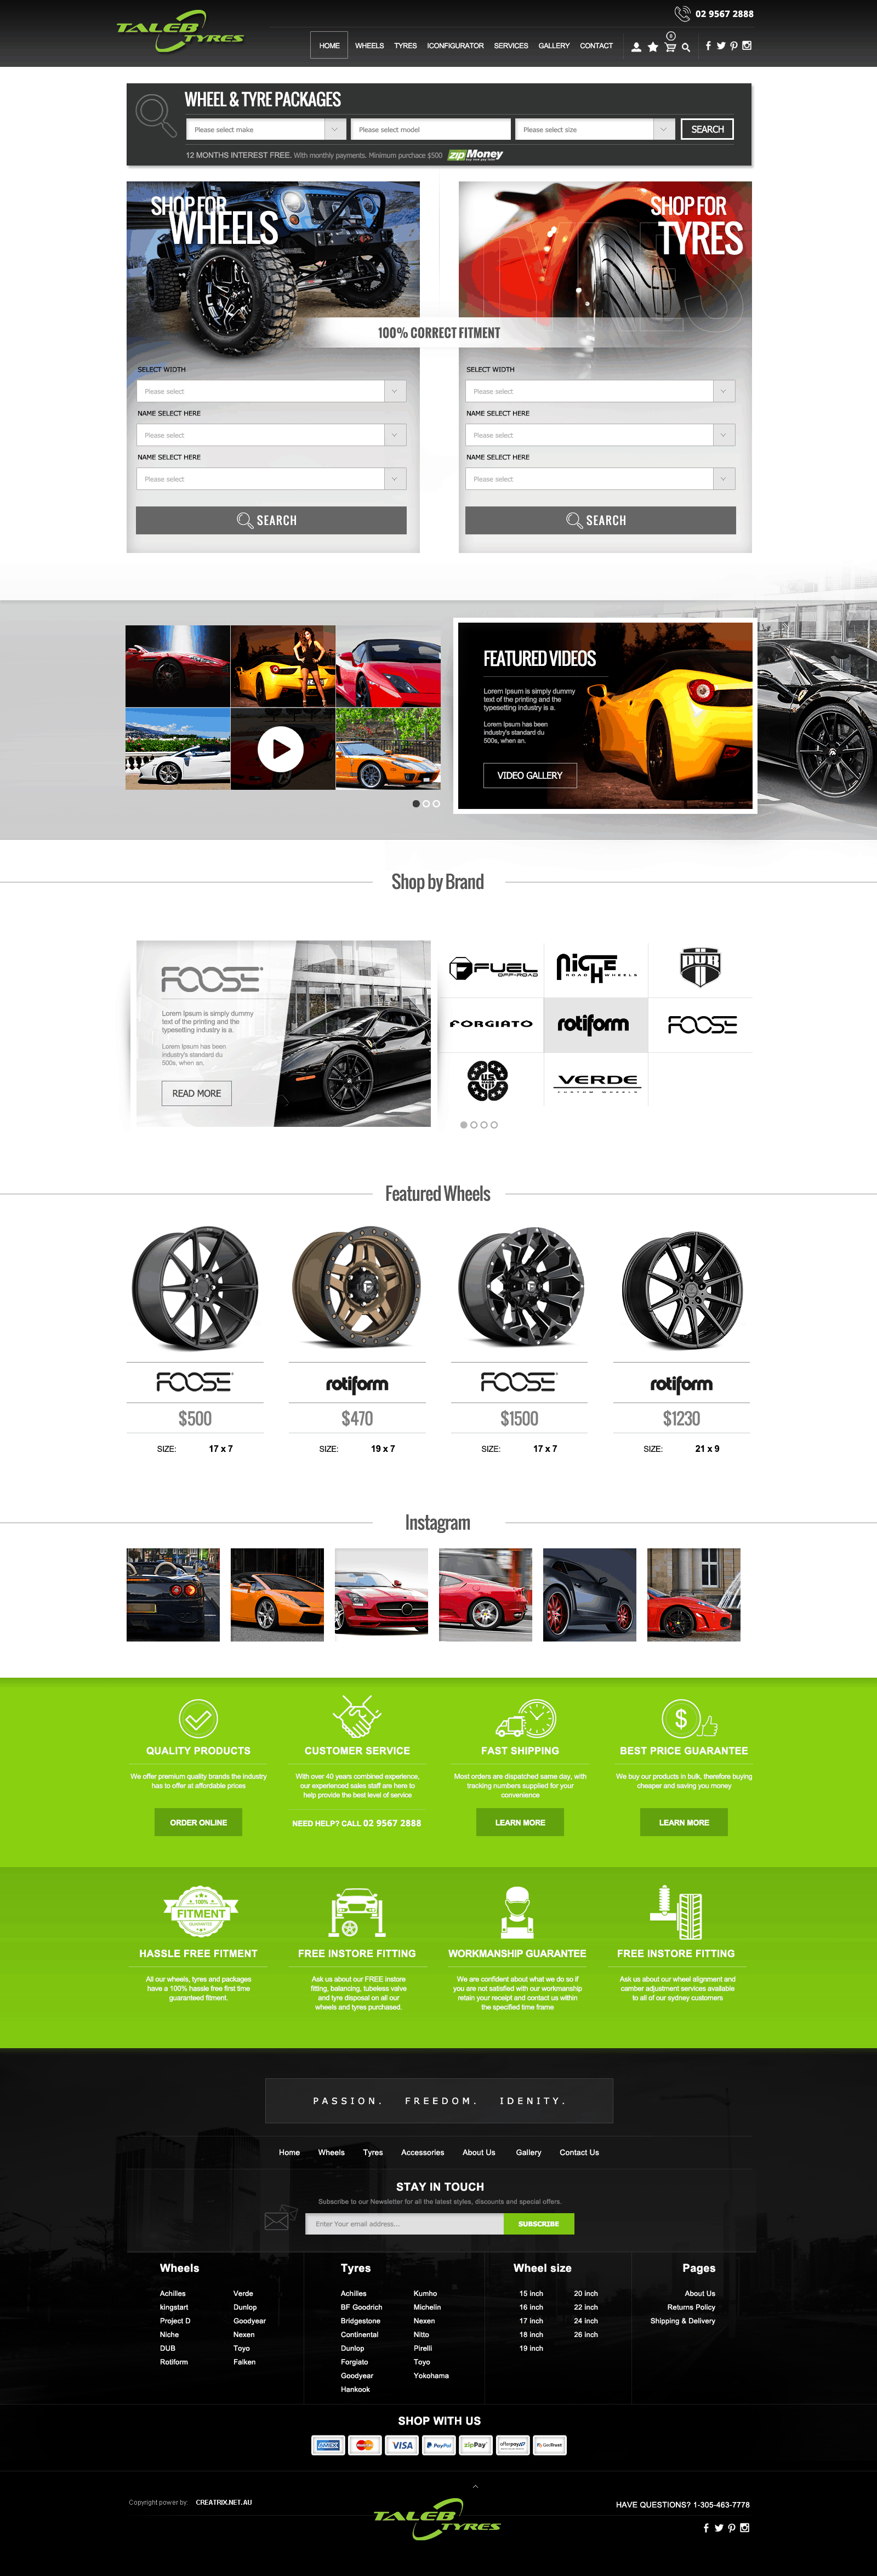 Magento based ecommerce web design for Tableb Tyres